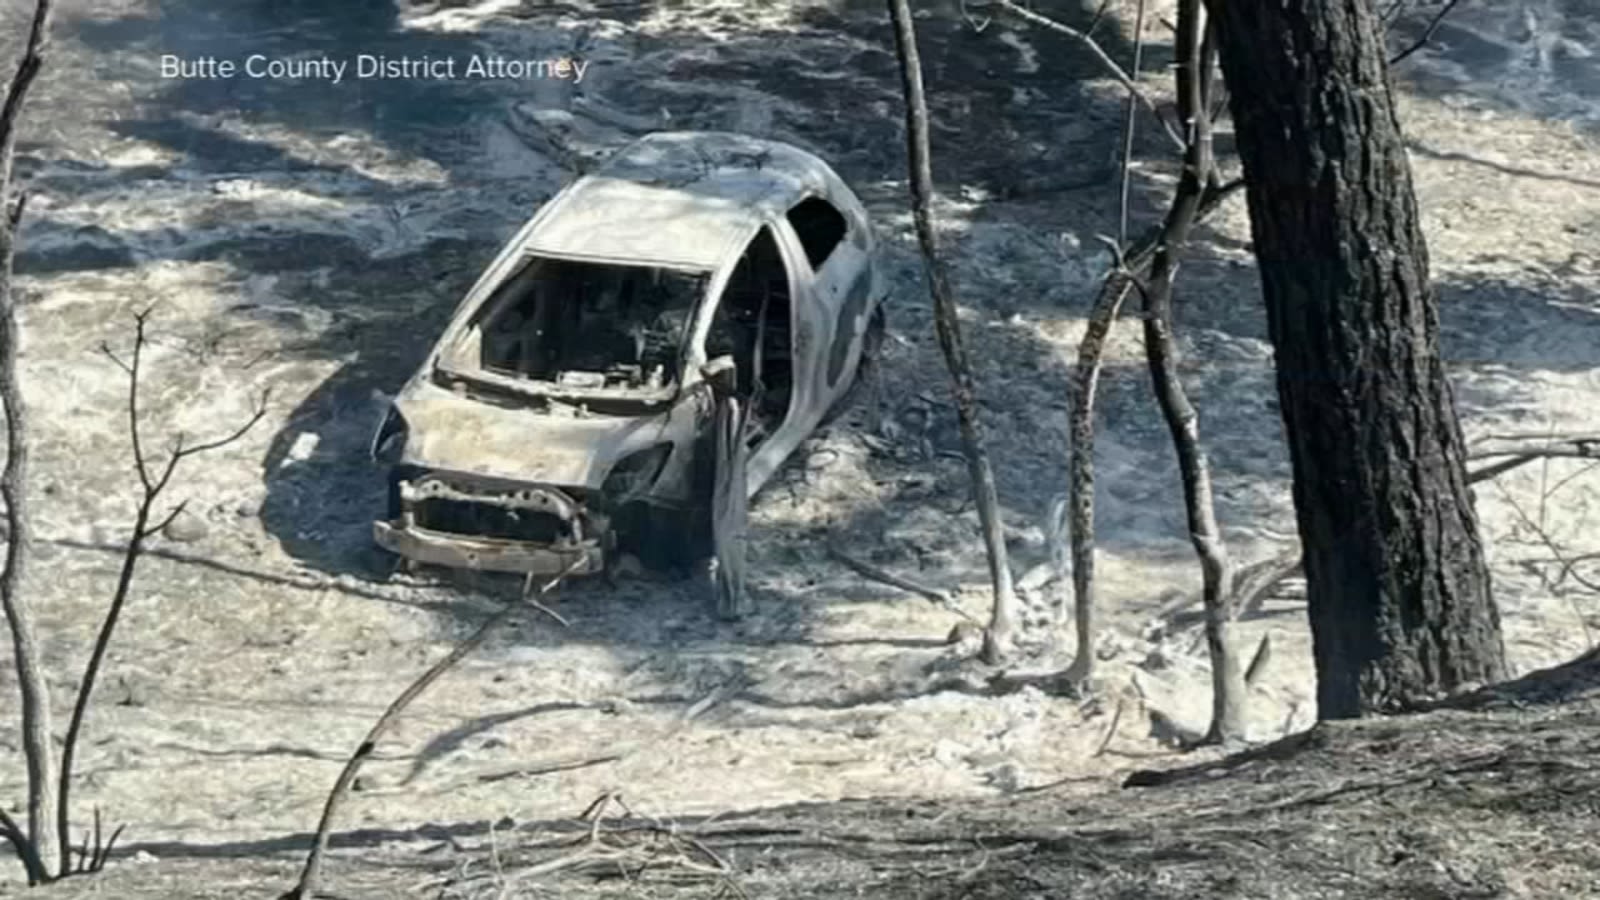 Park Fire: CA man charged with arson for allegedly igniting largest active wildfire in US